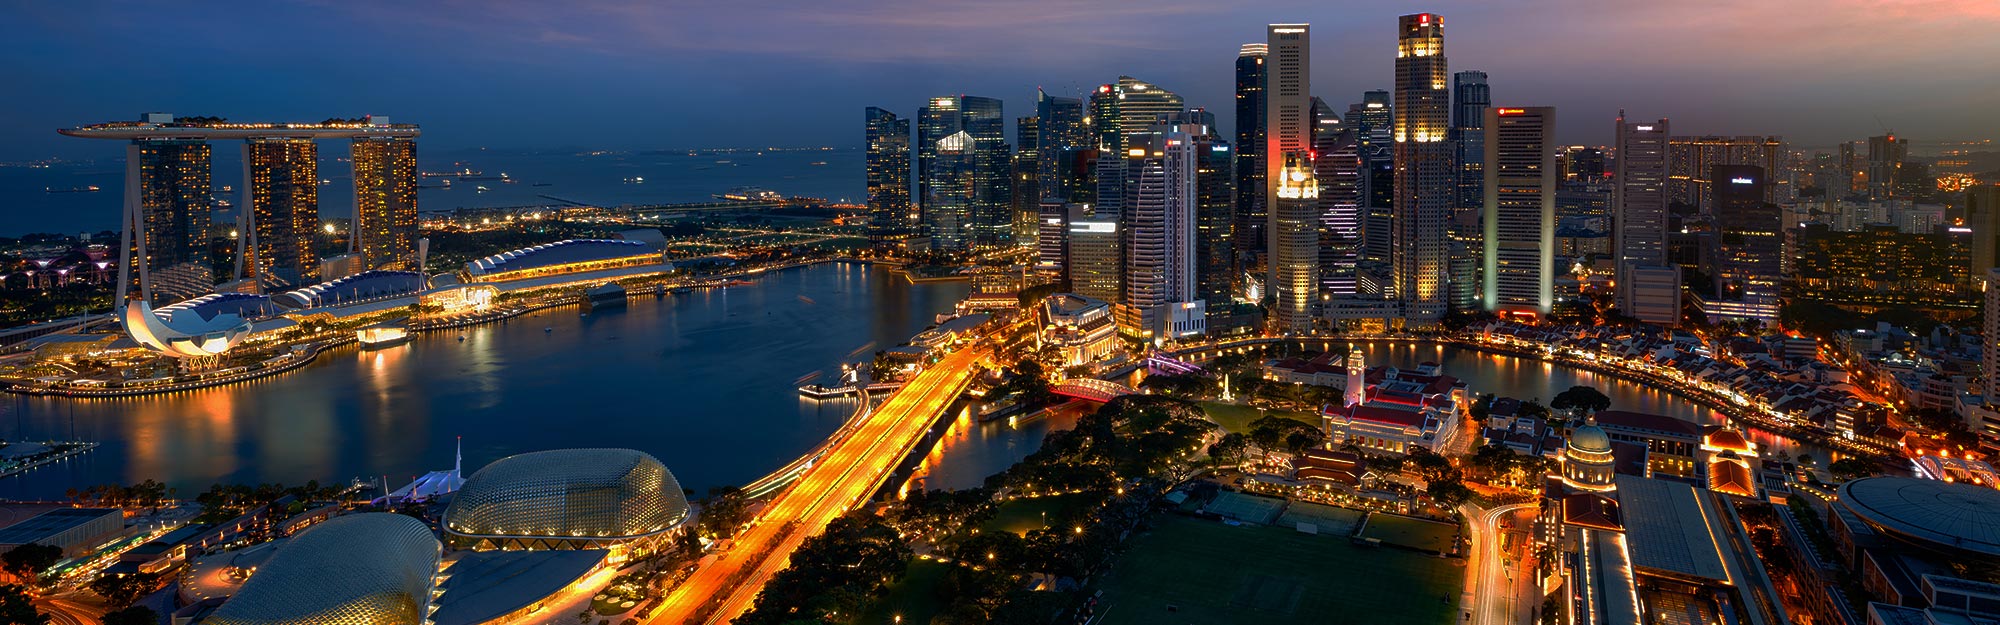 singapore skyline view from above